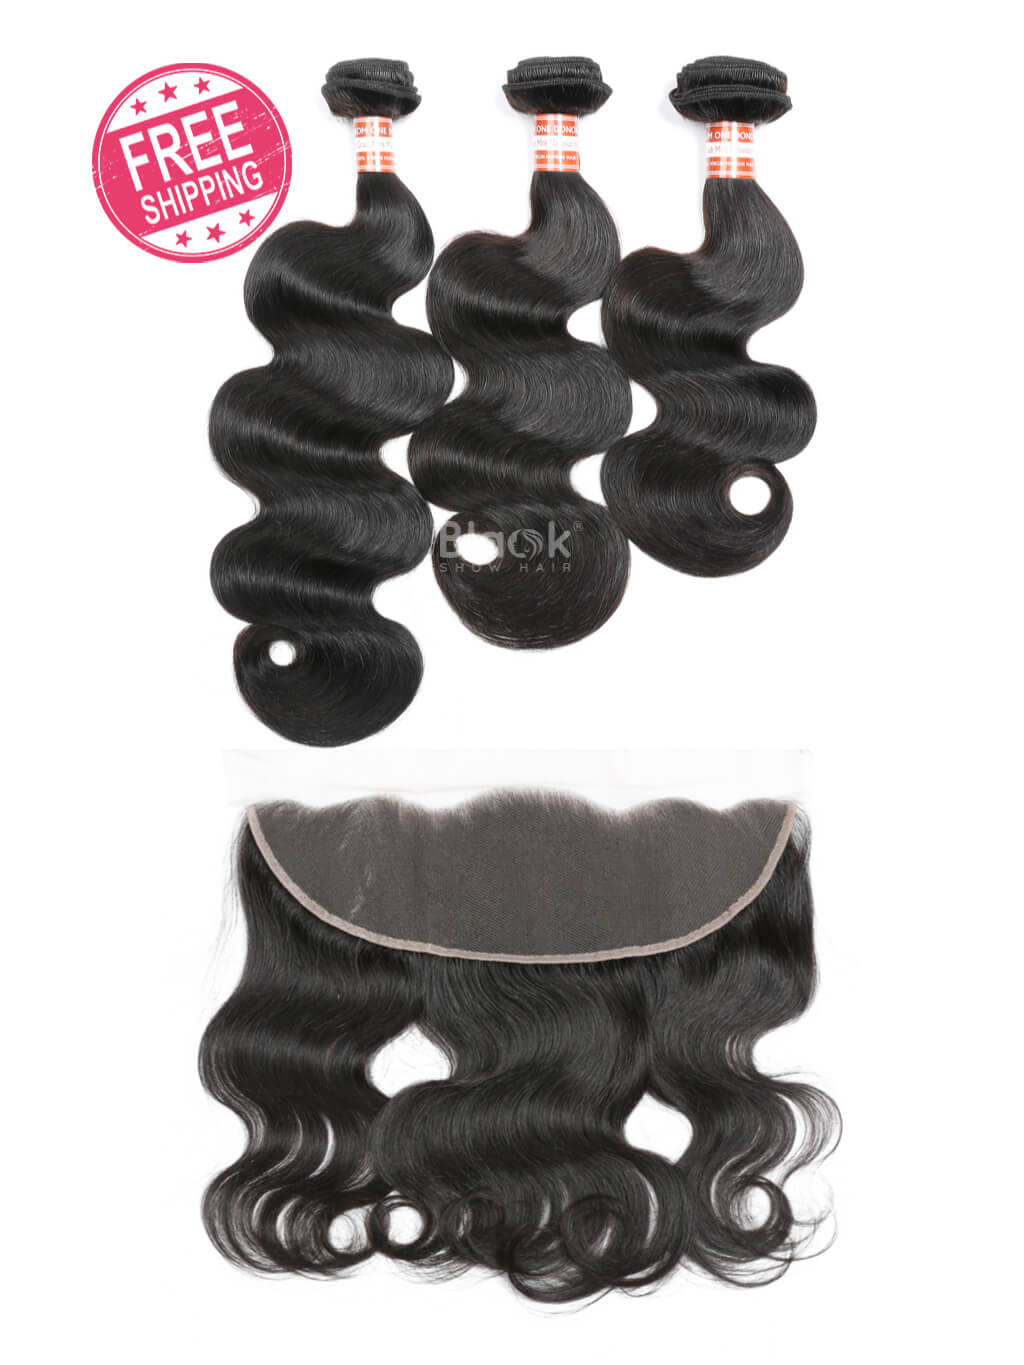 Body Wave Hair Bundles with 13x4 Transparent Lace Frontal - Black